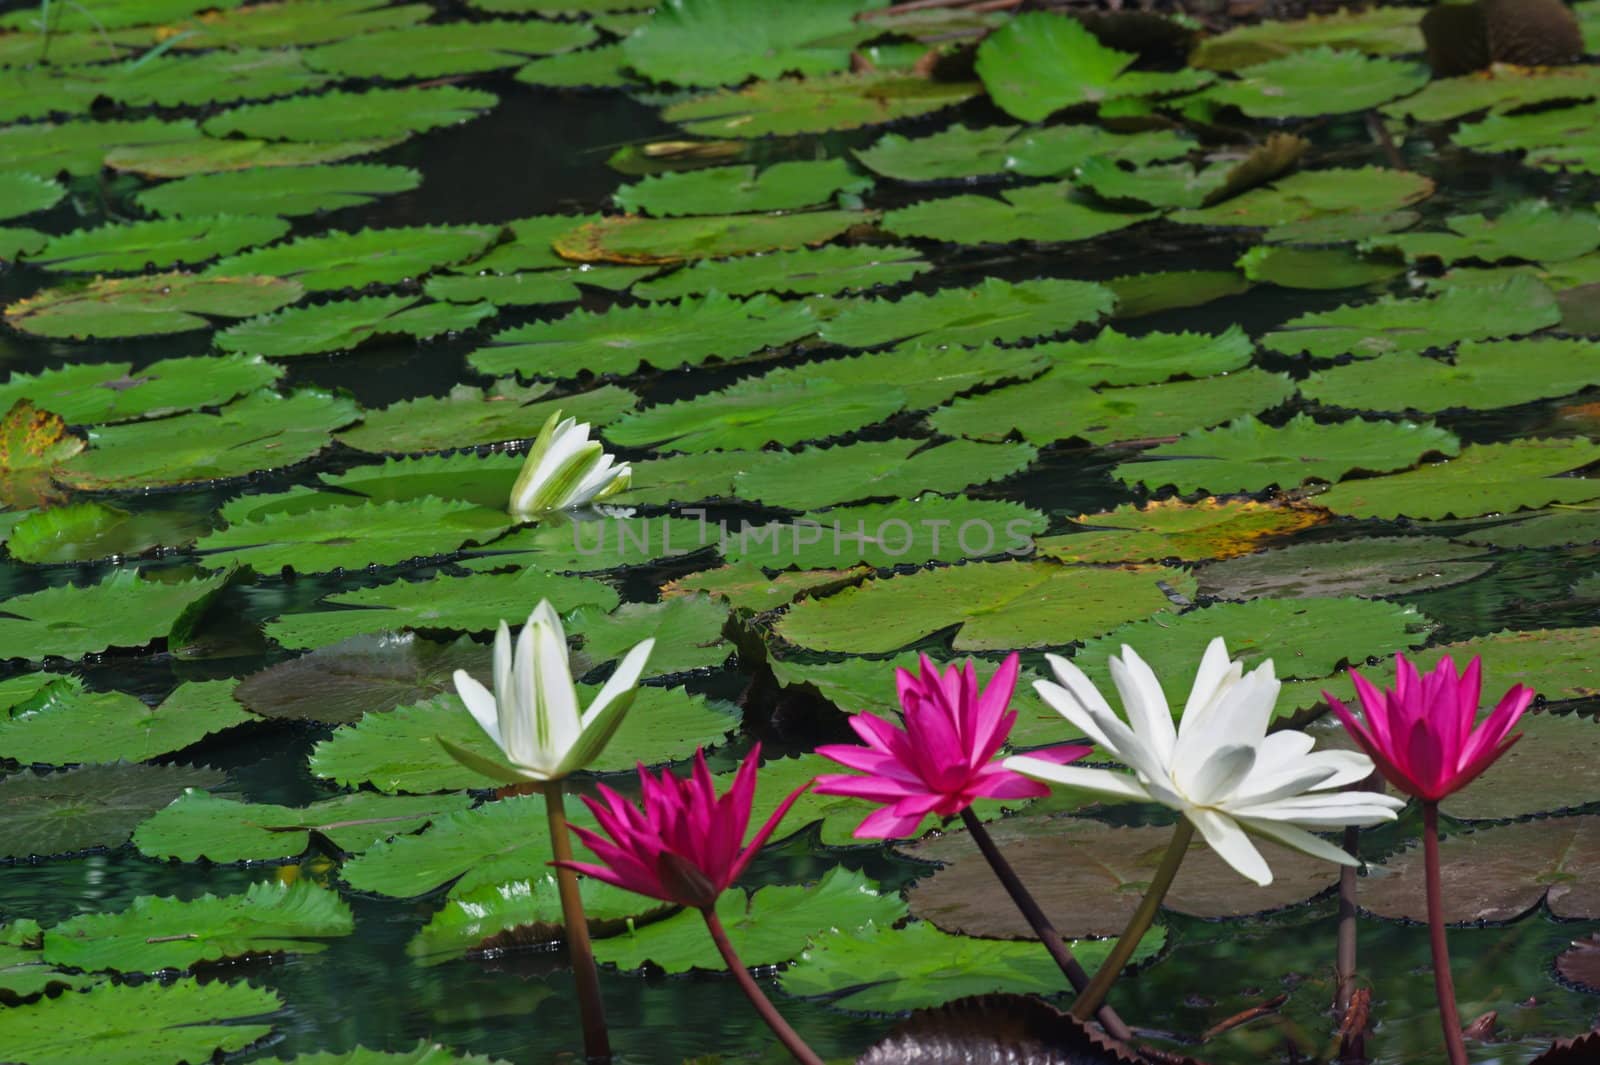 pink and white water lily by xfdly5